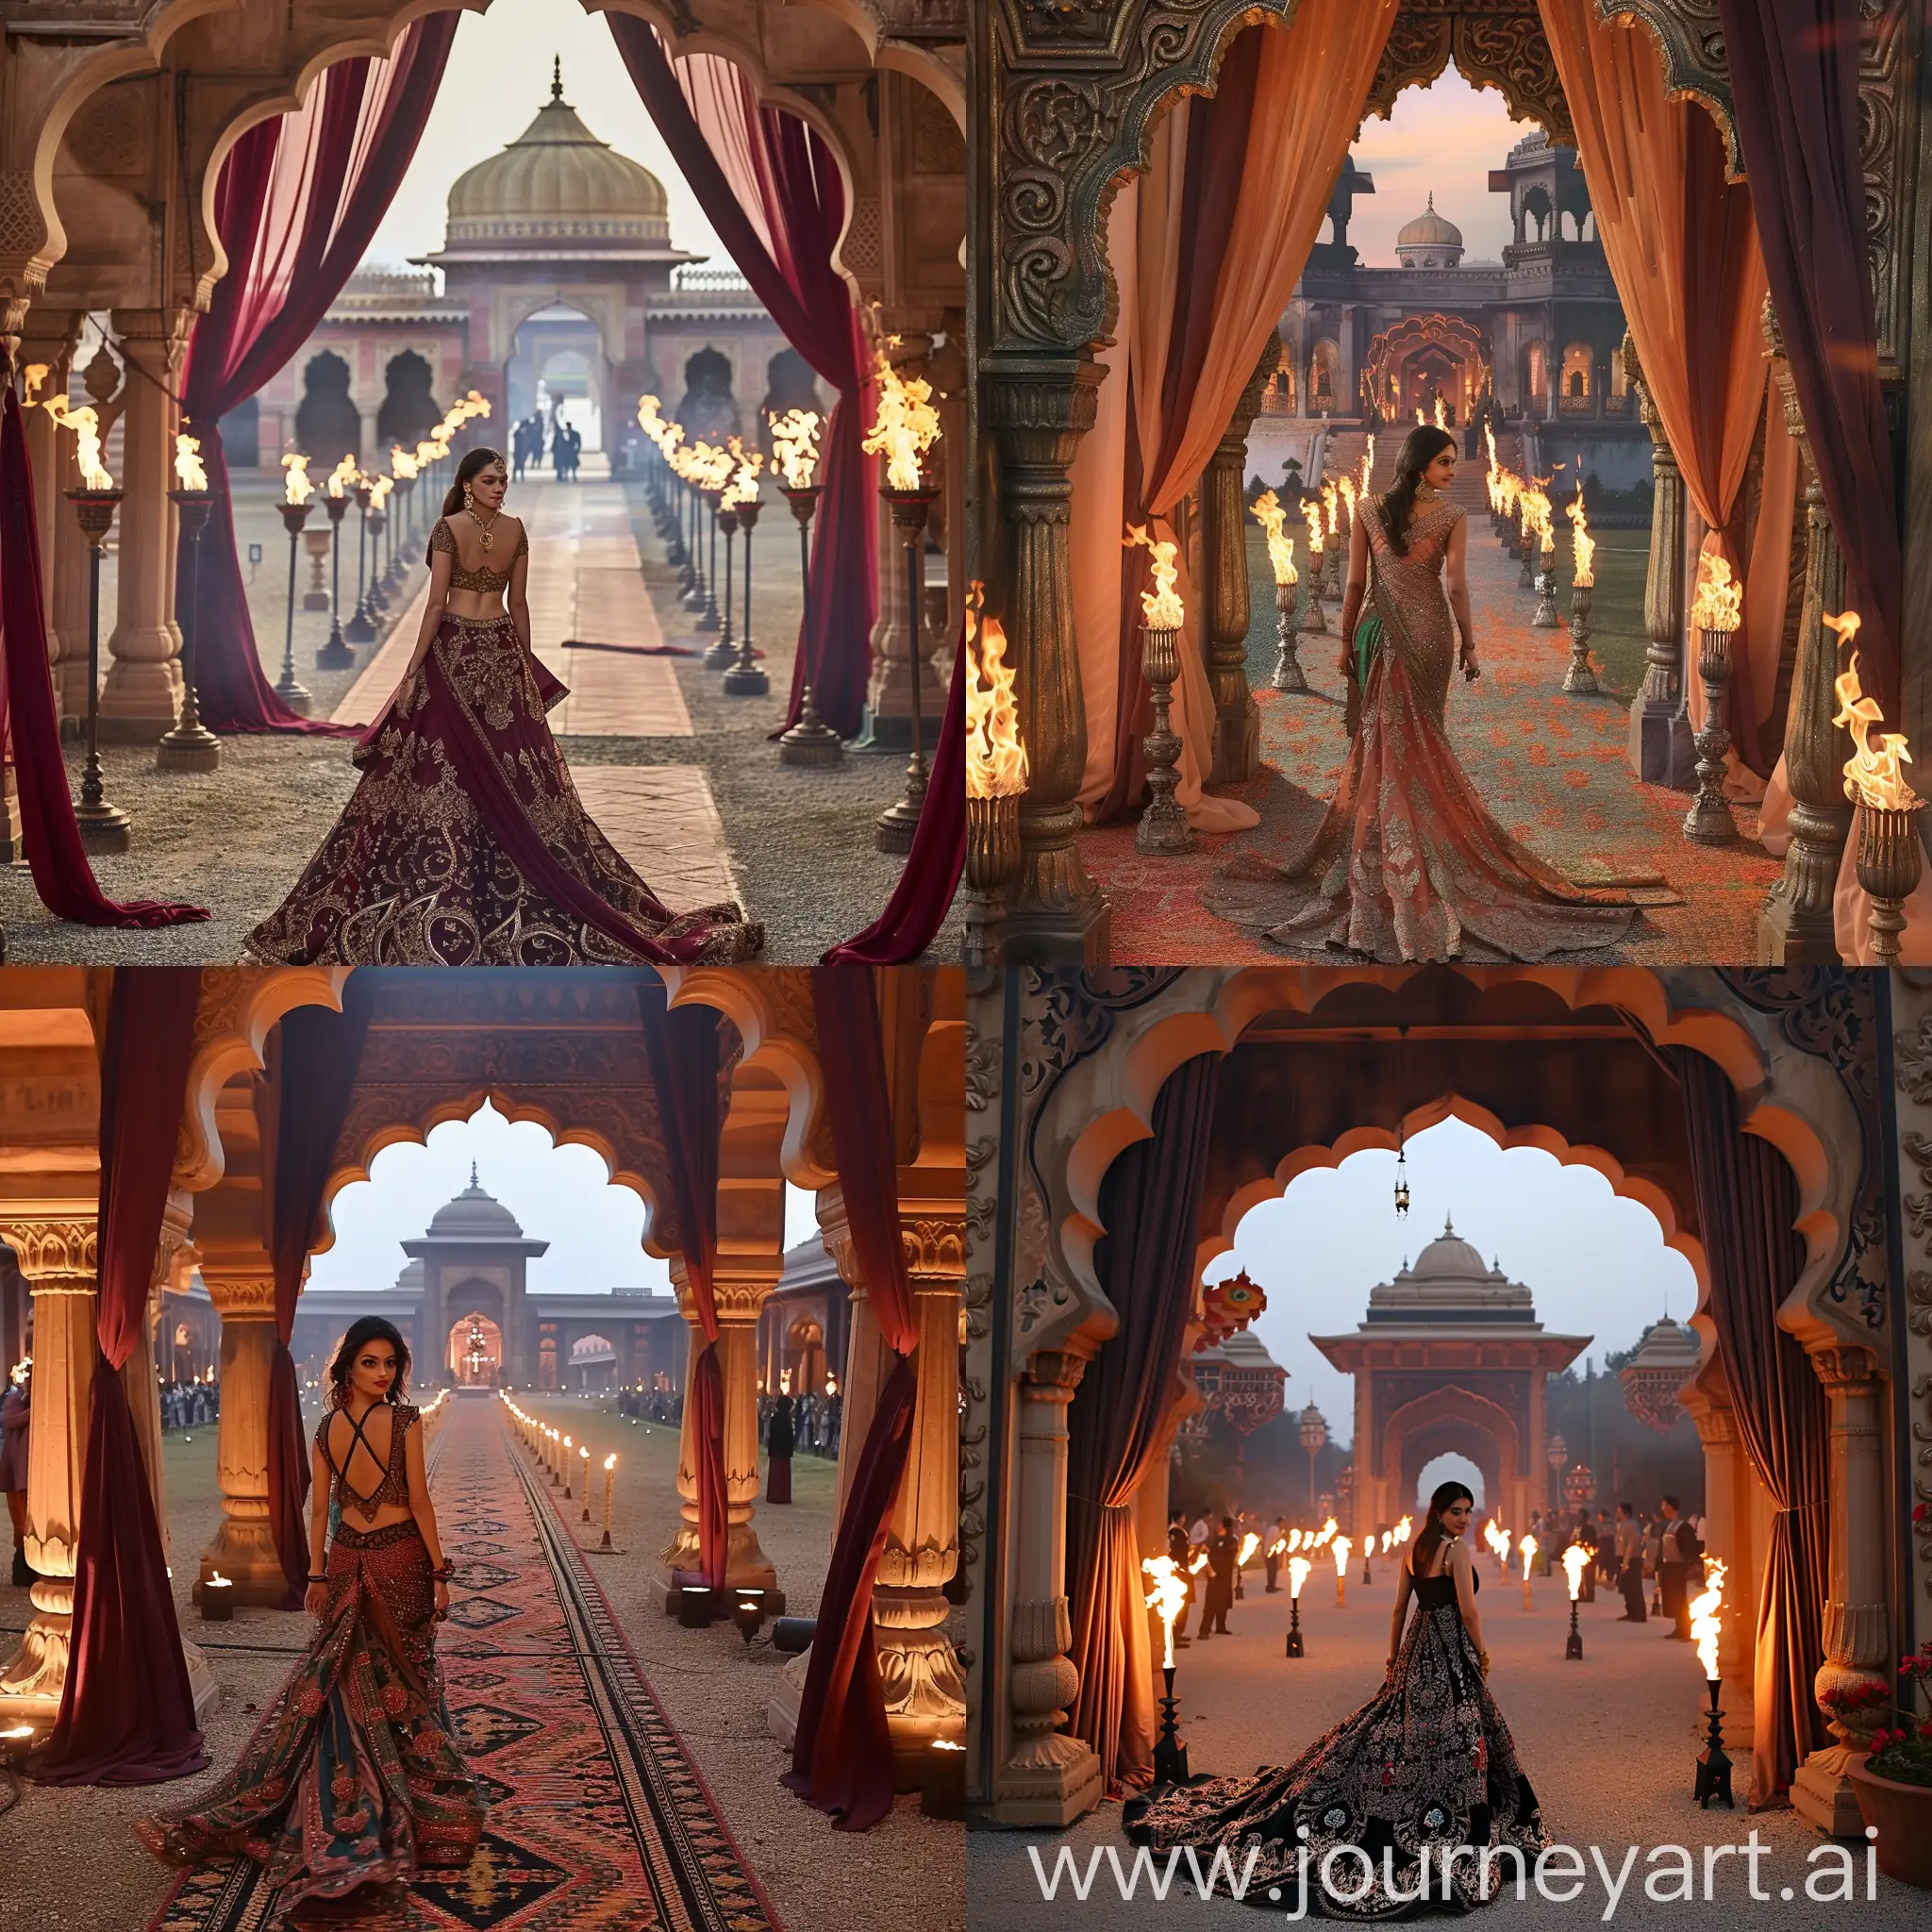 Deepika Padukone - An evening in Everland (Elegant Cocktail):  Prompt: Craft a detailed narrative that transports the reader through the process of Deepika Padukone selecting the enchanting cocktail gown for the red-carpet event themed "An evening in Everland." Describe the inspiration behind the gown, the emotions she feels while wearing it, and the anticipation of the glamorous evening ahead. Setting: An ornate and majestic entrance to a heritage palace or cultural center. Description: Imagine a grand entrance with intricately carved arches, adorned with traditional motifs and vibrant drapes. The pathway is lined with flickering torches, casting a warm glow. As the celebrities make their way through this opulent entrance, they enter a vast courtyard that serves as the main venue for the cultural event. Setting: An ornate and majestic entrance to a heritage palace or cultural center. Description: Imagine a grand entrance with intricately carved arches, adorned with traditional motifs and vibrant drapes. The pathway is lined with flickering torches, casting a warm glow. As the celebrities make their way through this opulent entrance, they enter a vast courtyard that serves as the main venue for the cultural event.Setting: An ornate and majestic entrance to a heritage palace or cultural center.